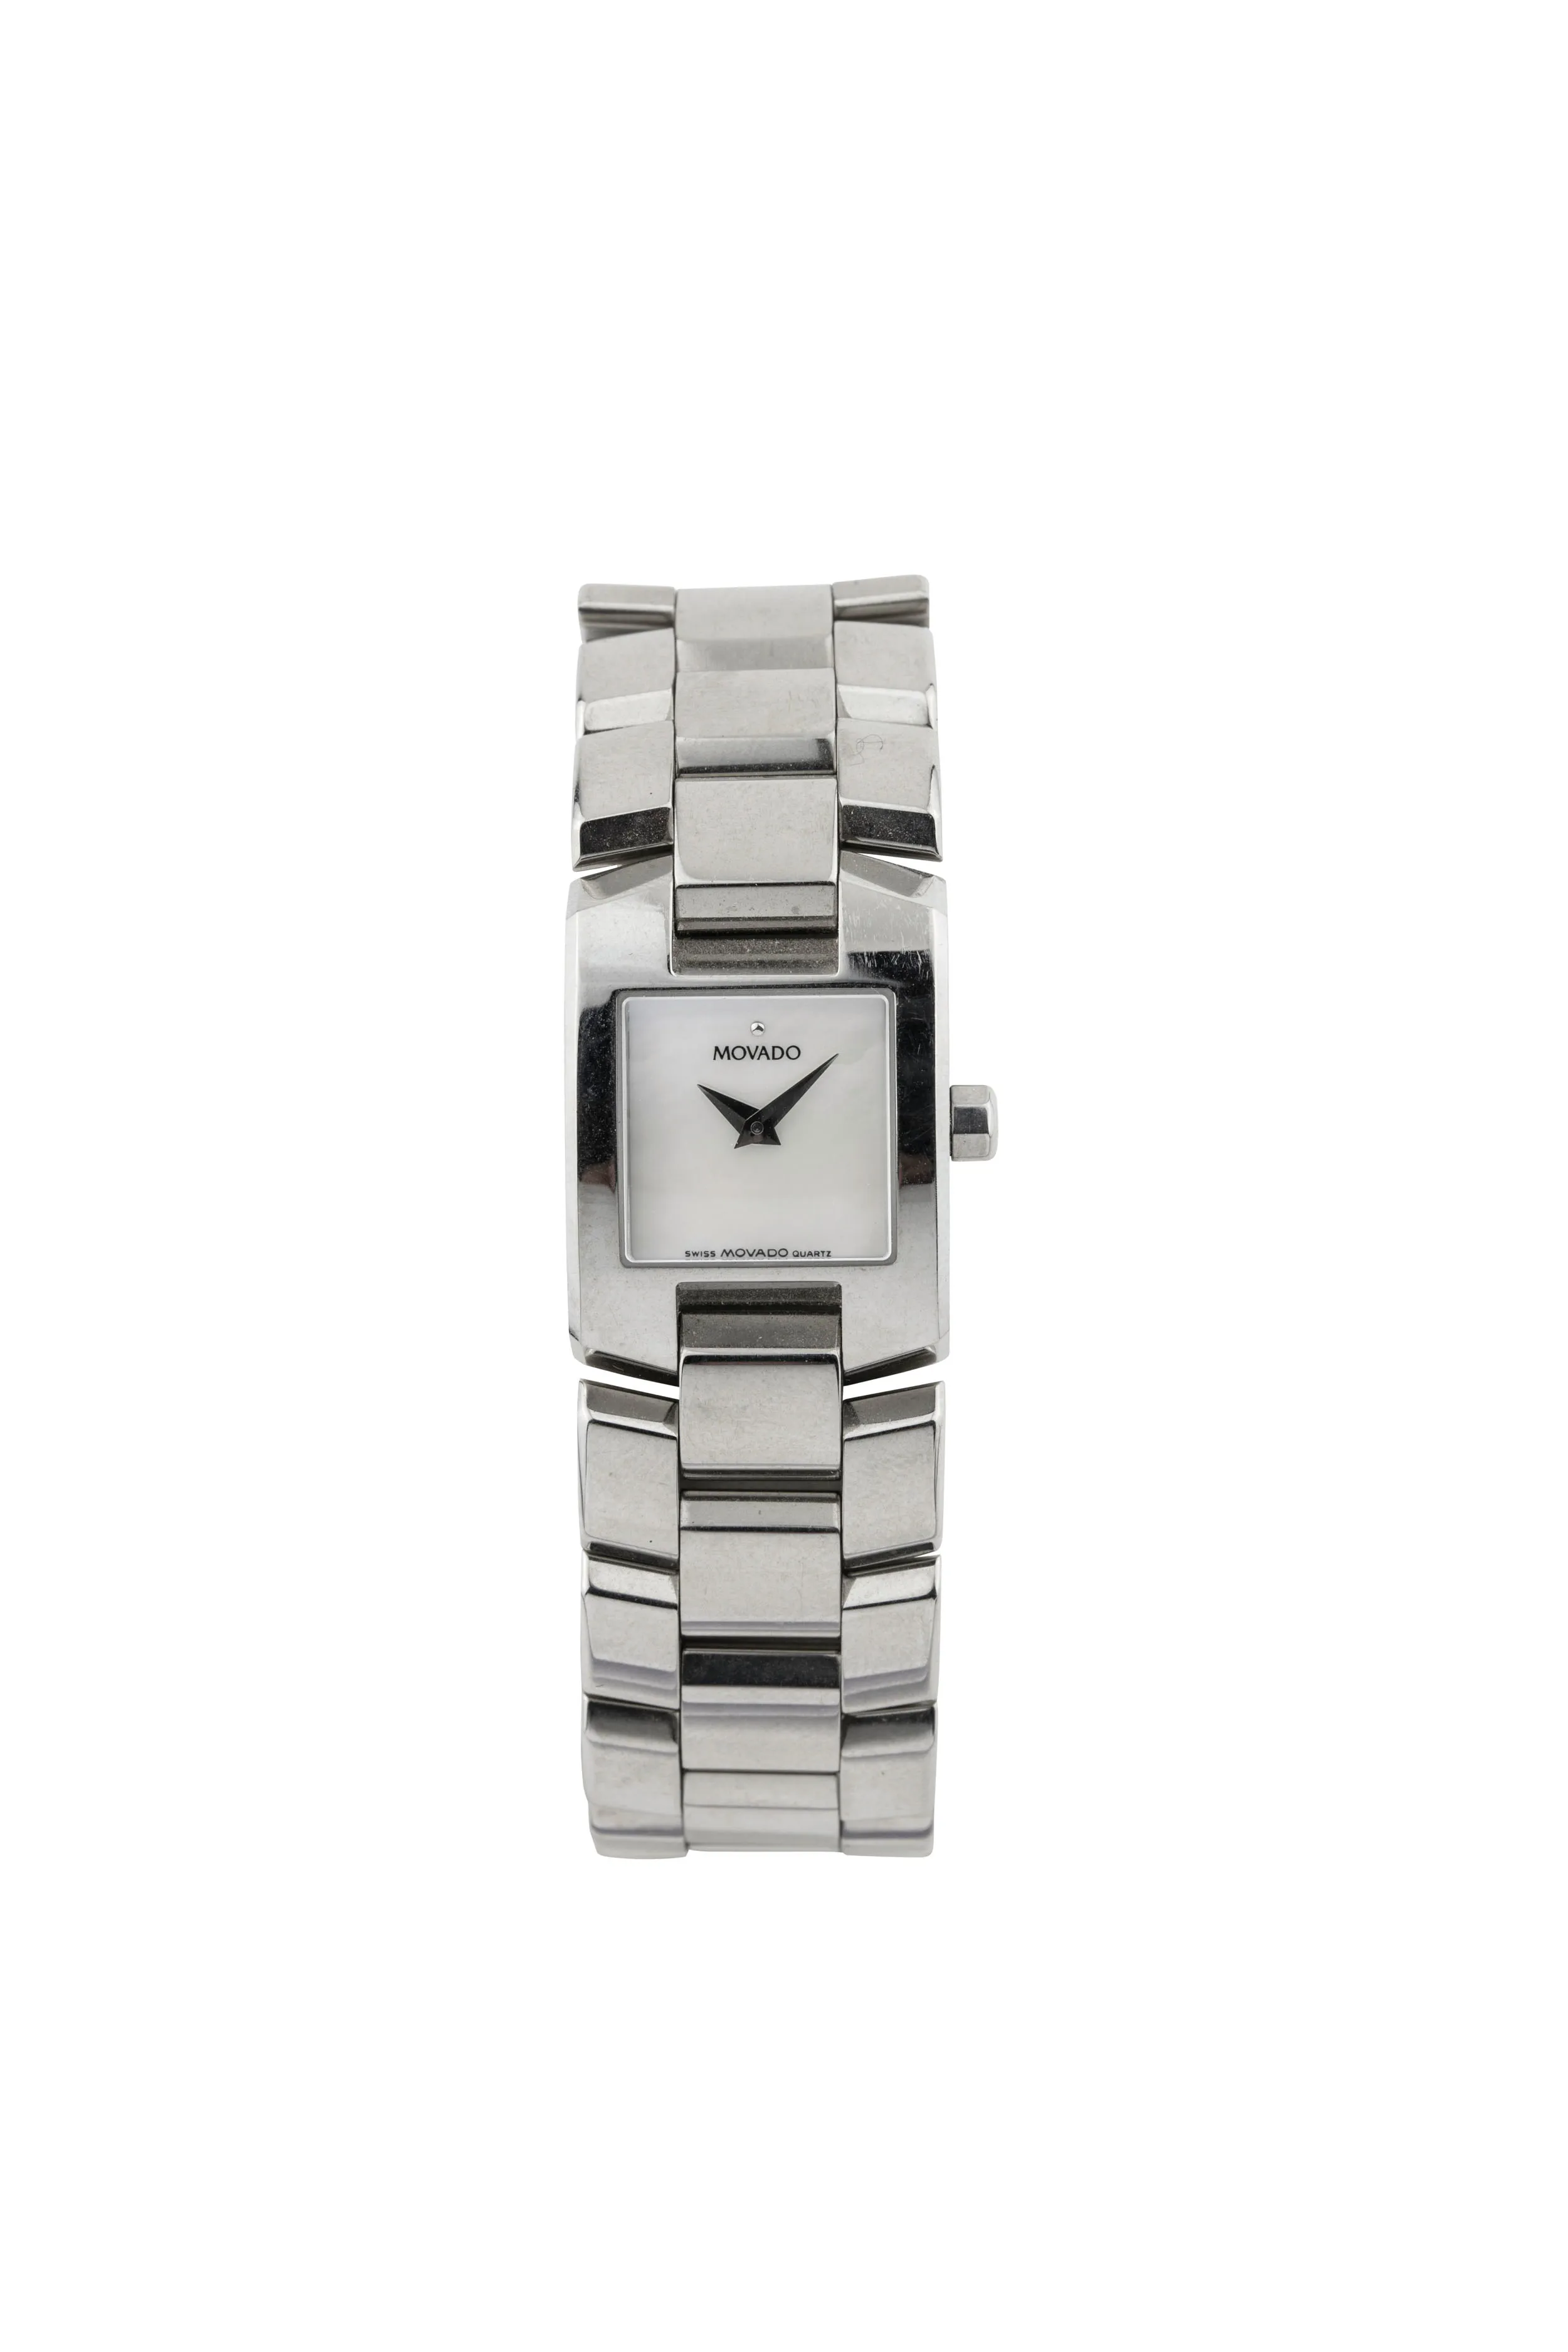 Movado 11-A1-531 21mm Stainless steel